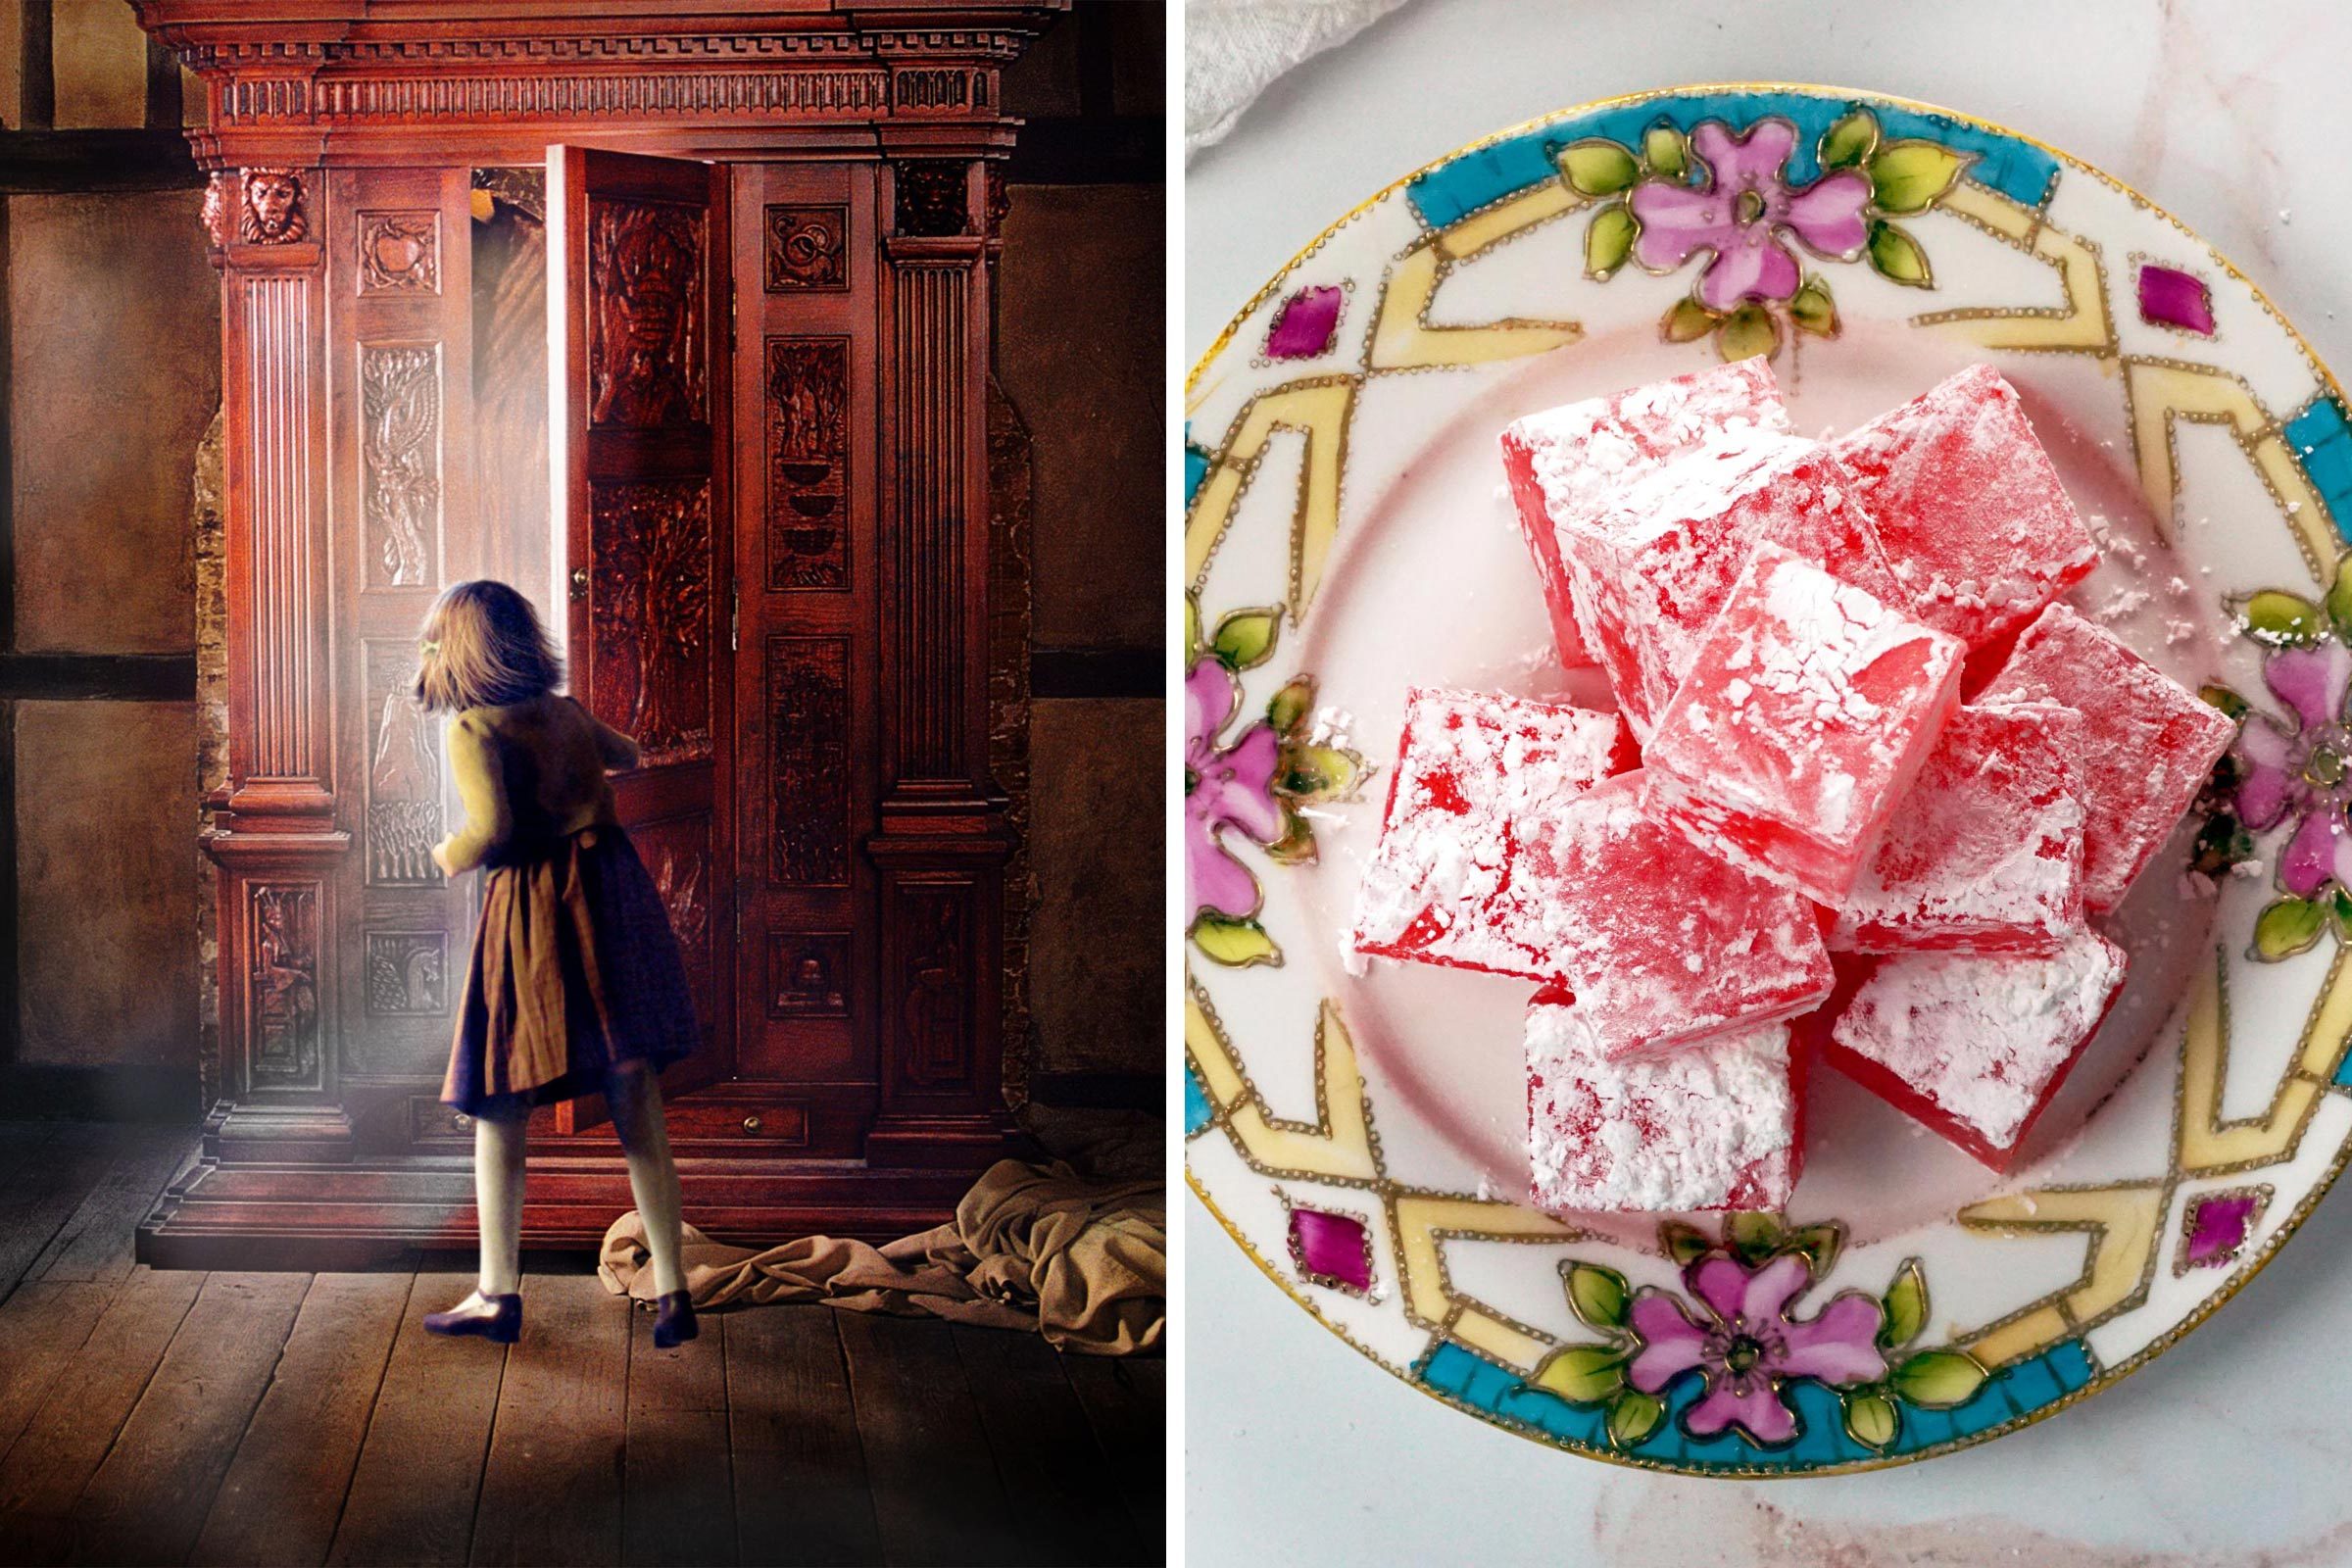 "The Lion the Witch and the wardrobe" and a plate of Turkish delights